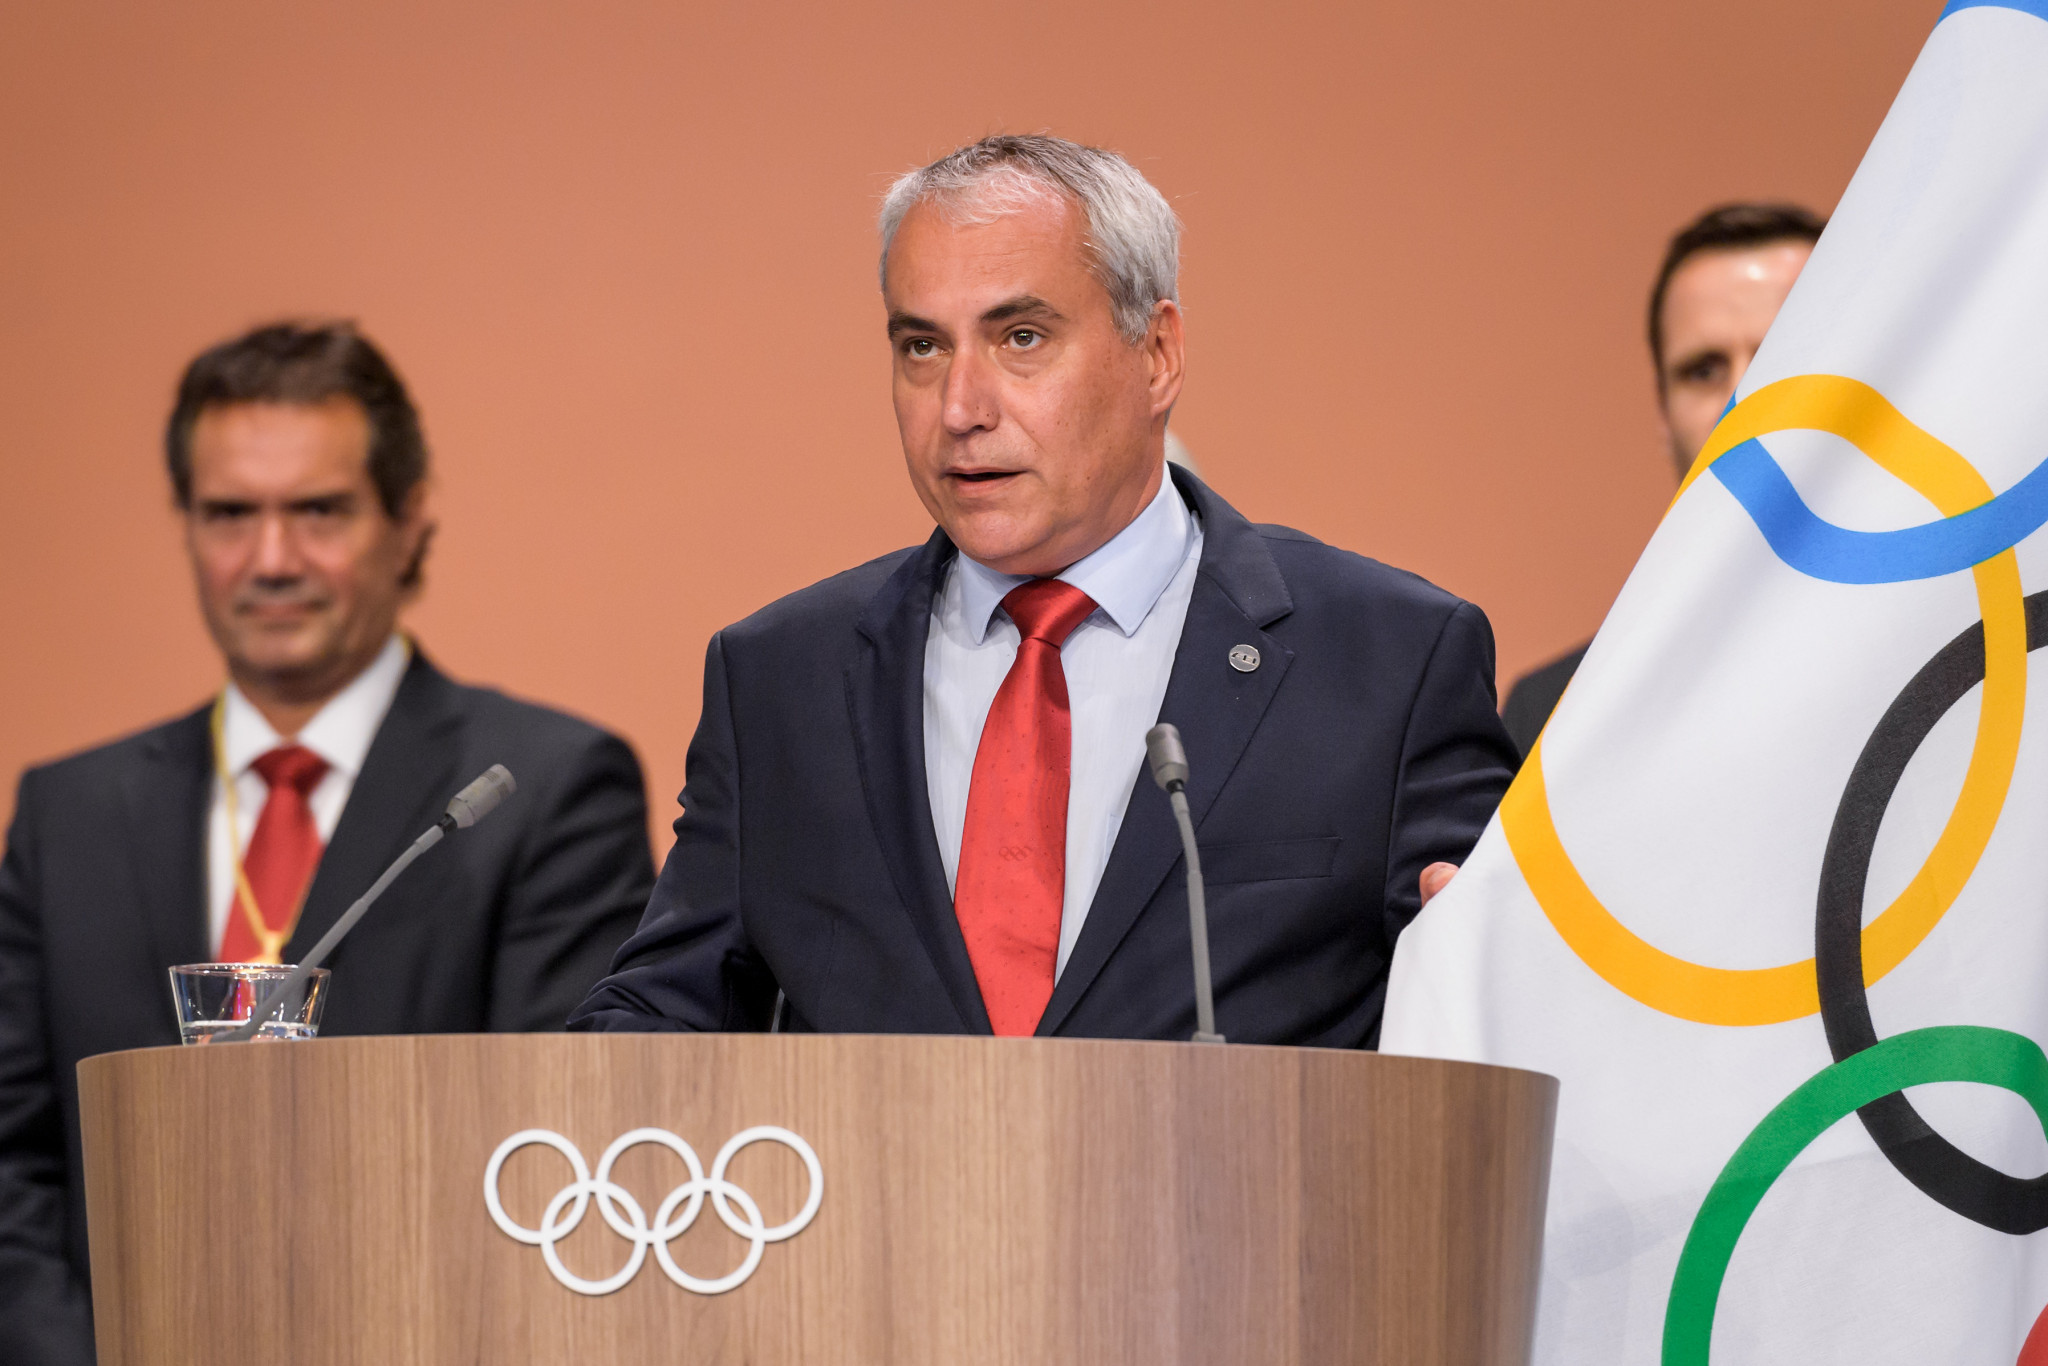 FEI President Ingmar De Vos has requested an alternative event be held in place of the postponed Summer Youth Olympic Games in Dakar ©Getty Images